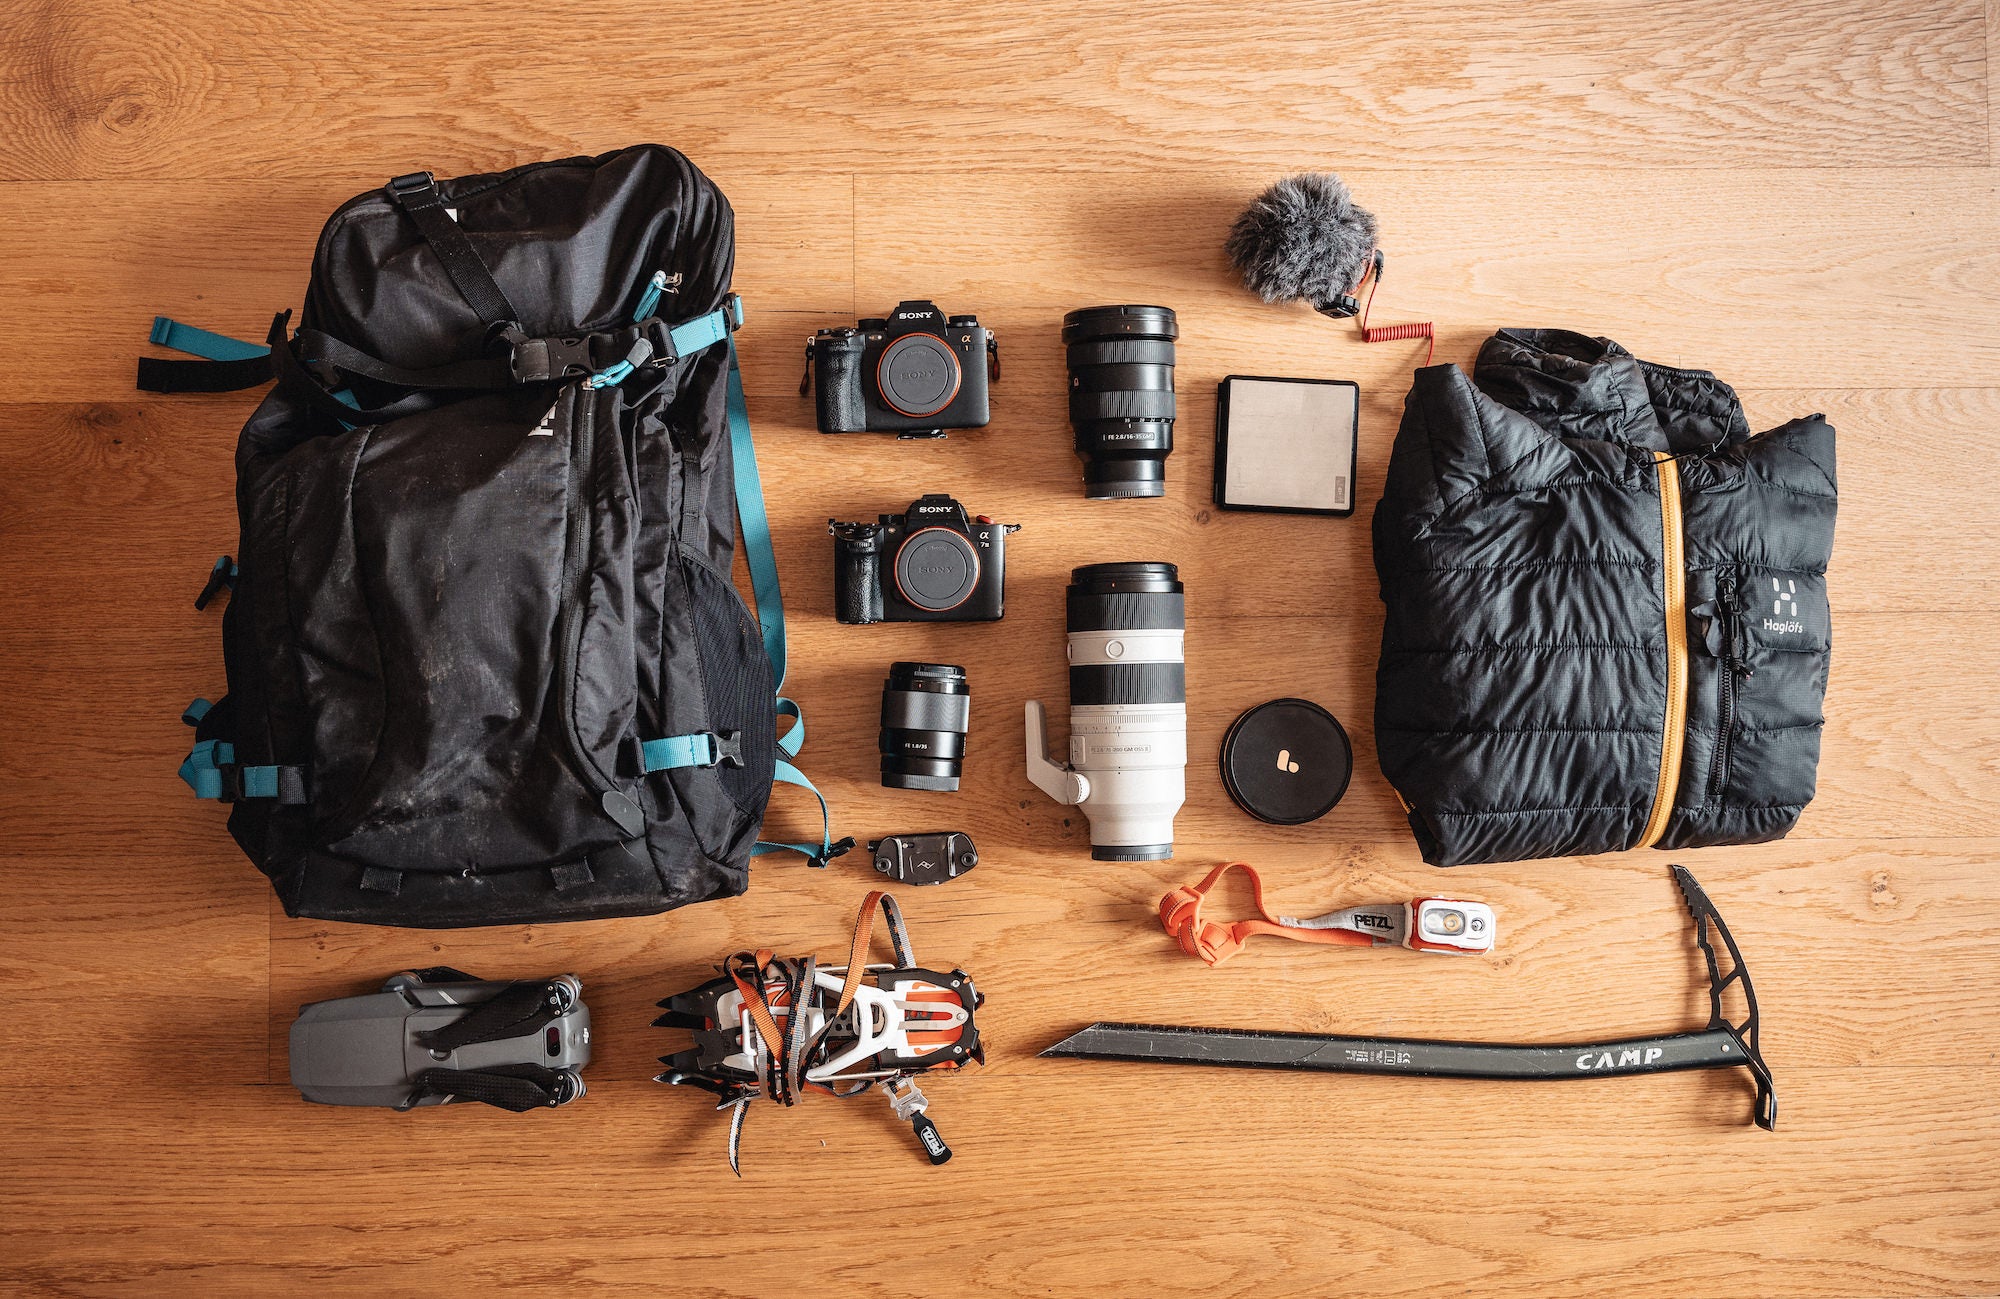 Mathis Decroux's kit for adventure photo and video